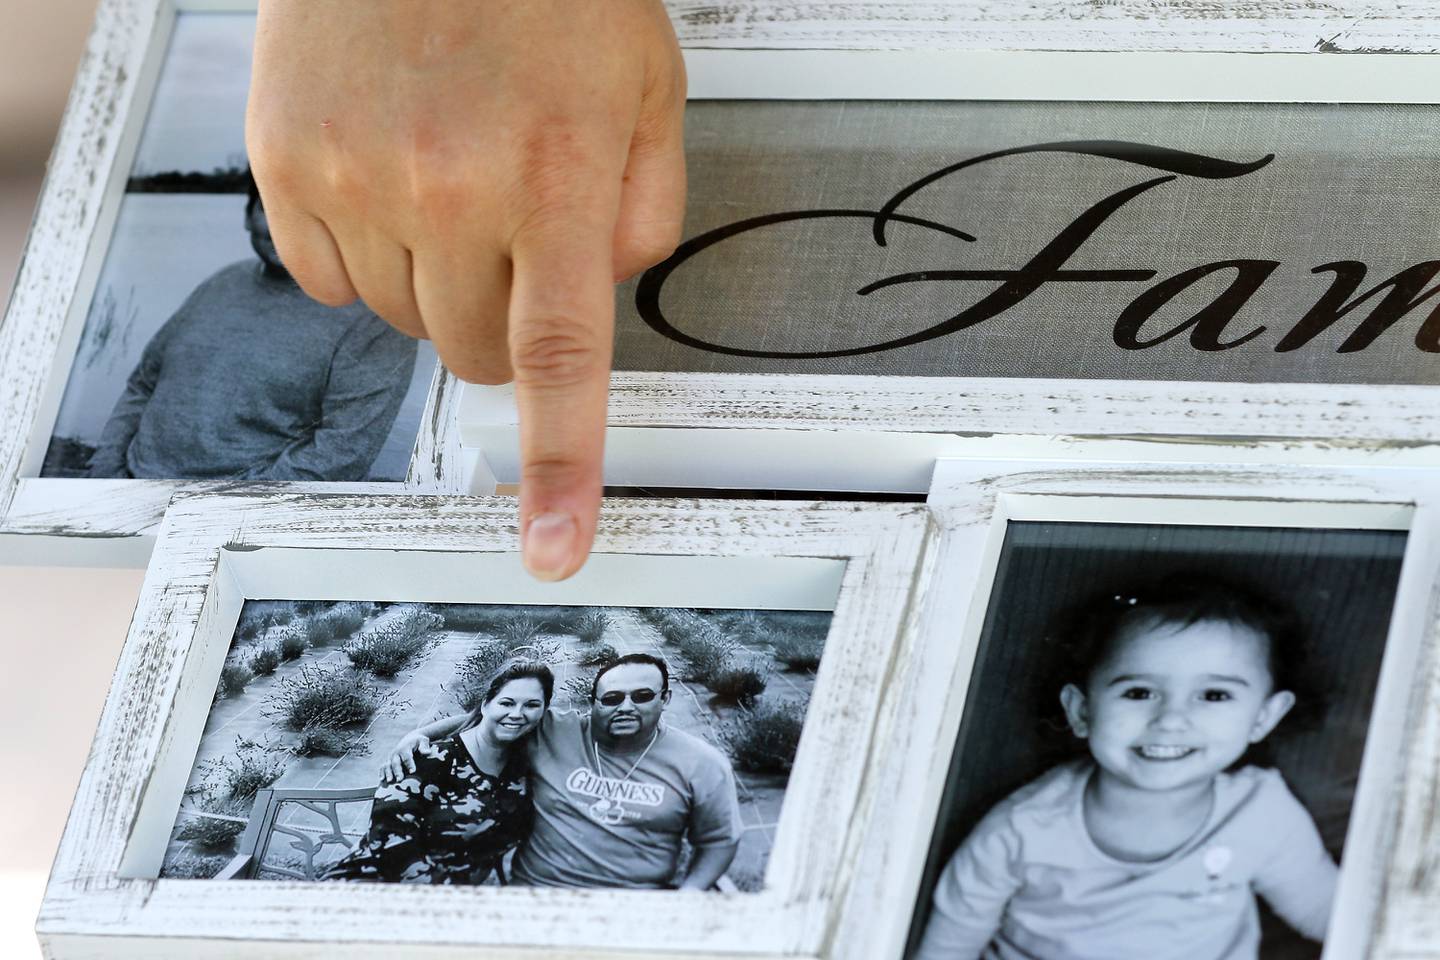 Kristin Glauner points out a family photo of herself and fiance Cesar Elizarraraz at home on Thursday, June 3, 2021 in Crystal Lake. Cesar Mauricio Elizarraraz, father of the five children and fiancee to Kristin Glauner, could potentially be deported back to Mexico on Friday.